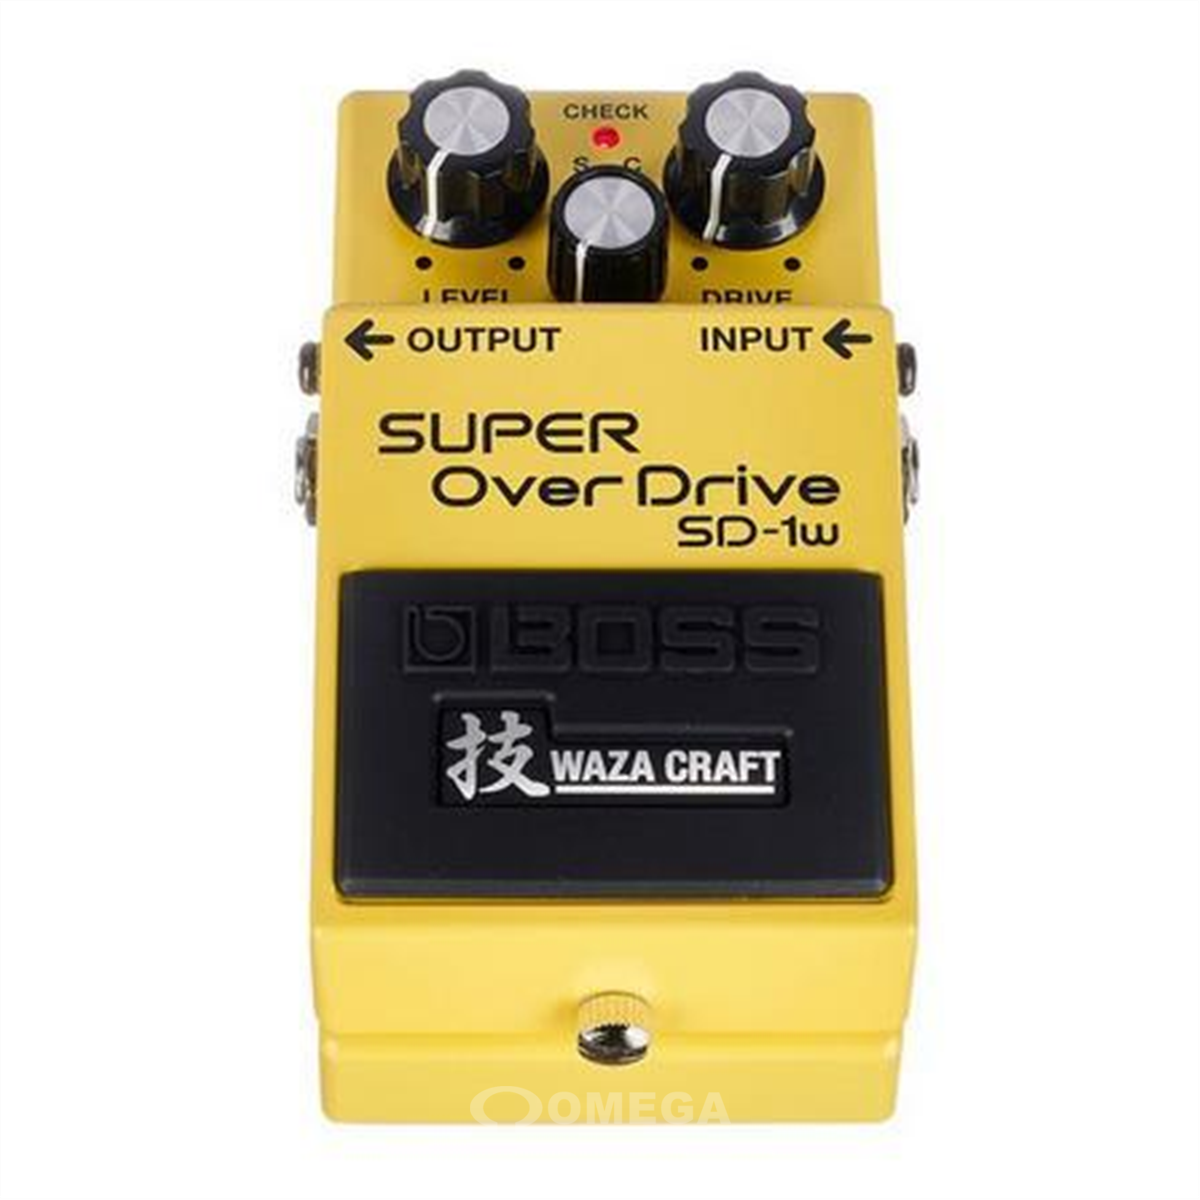 BOSS SD-1W Super Overd Waza Craft Special Edition